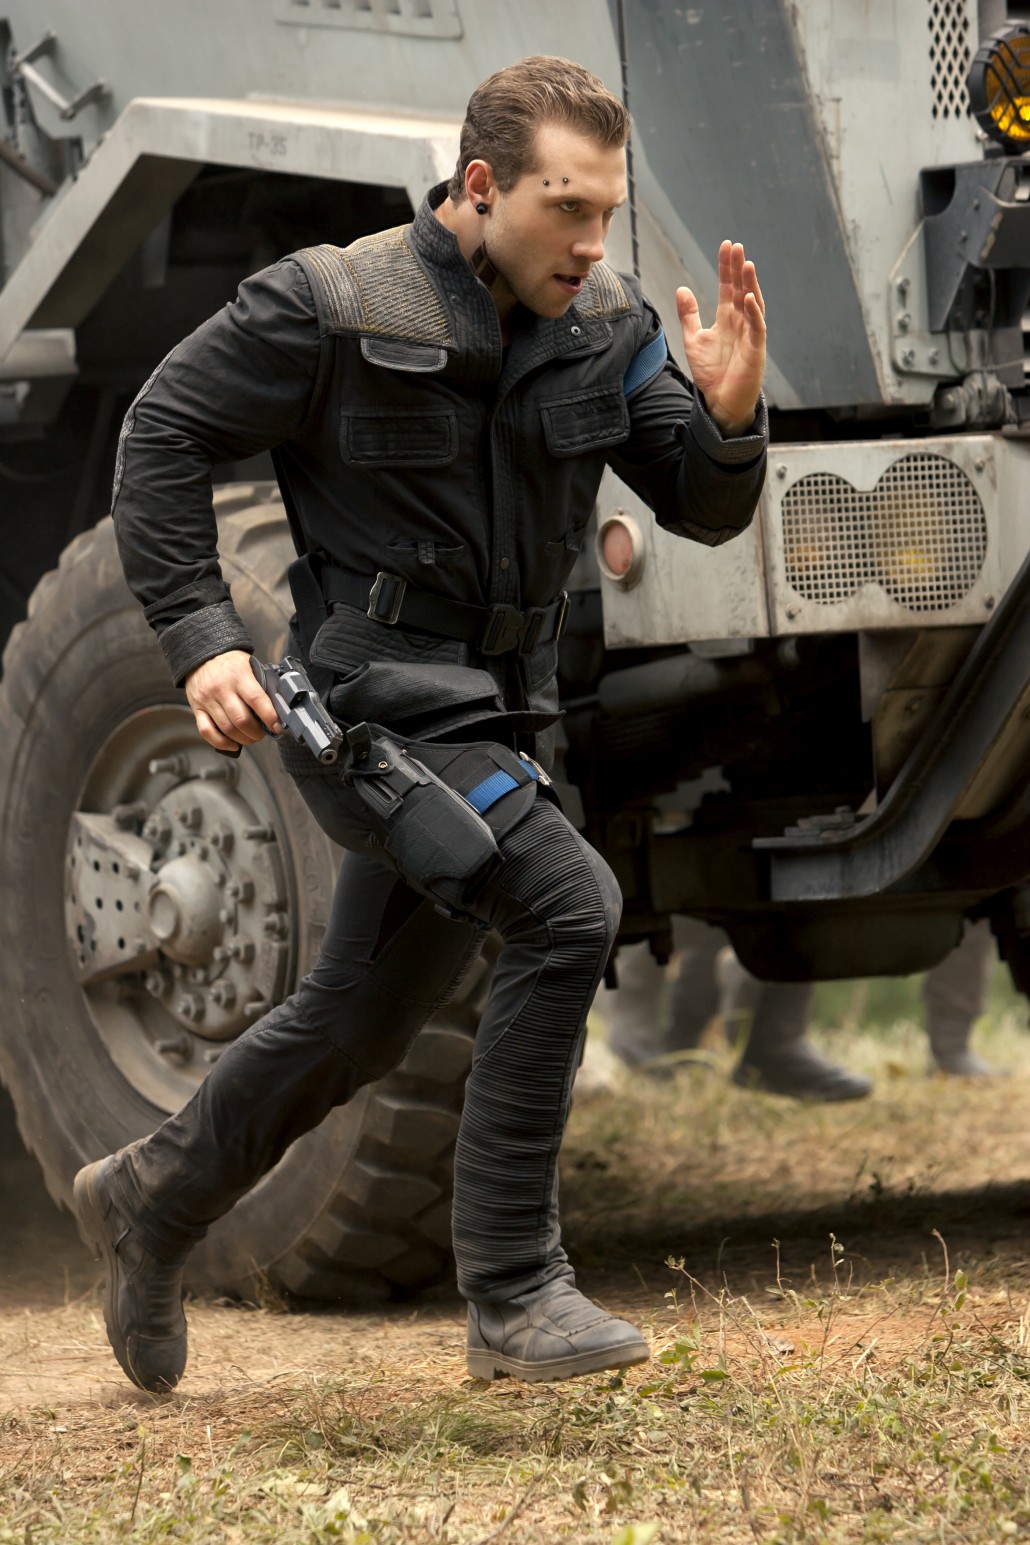 Jai Courtney as Eric  in The Divergent Series: Insurgent. Copyright 2015, Lionsgate Productions